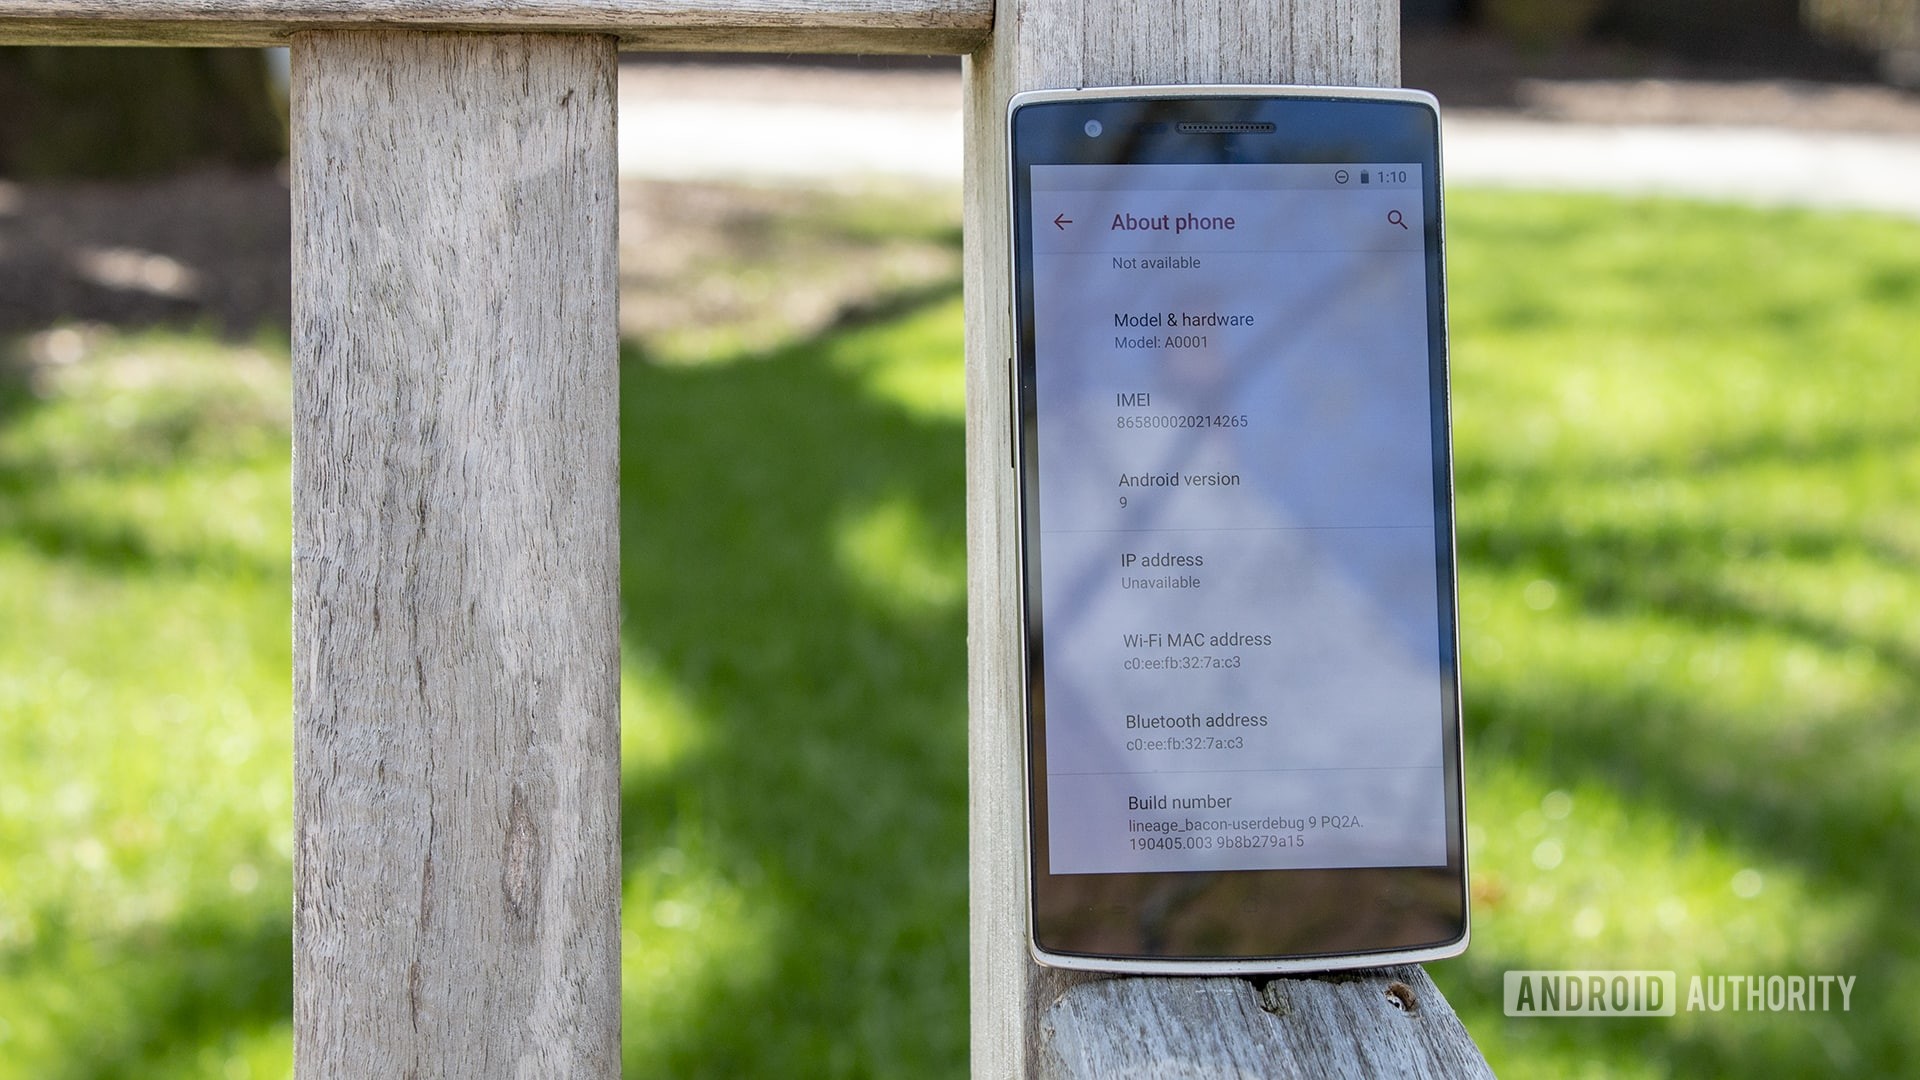 A OnePlus One leaning on a bench with the About Phone page pulled up.